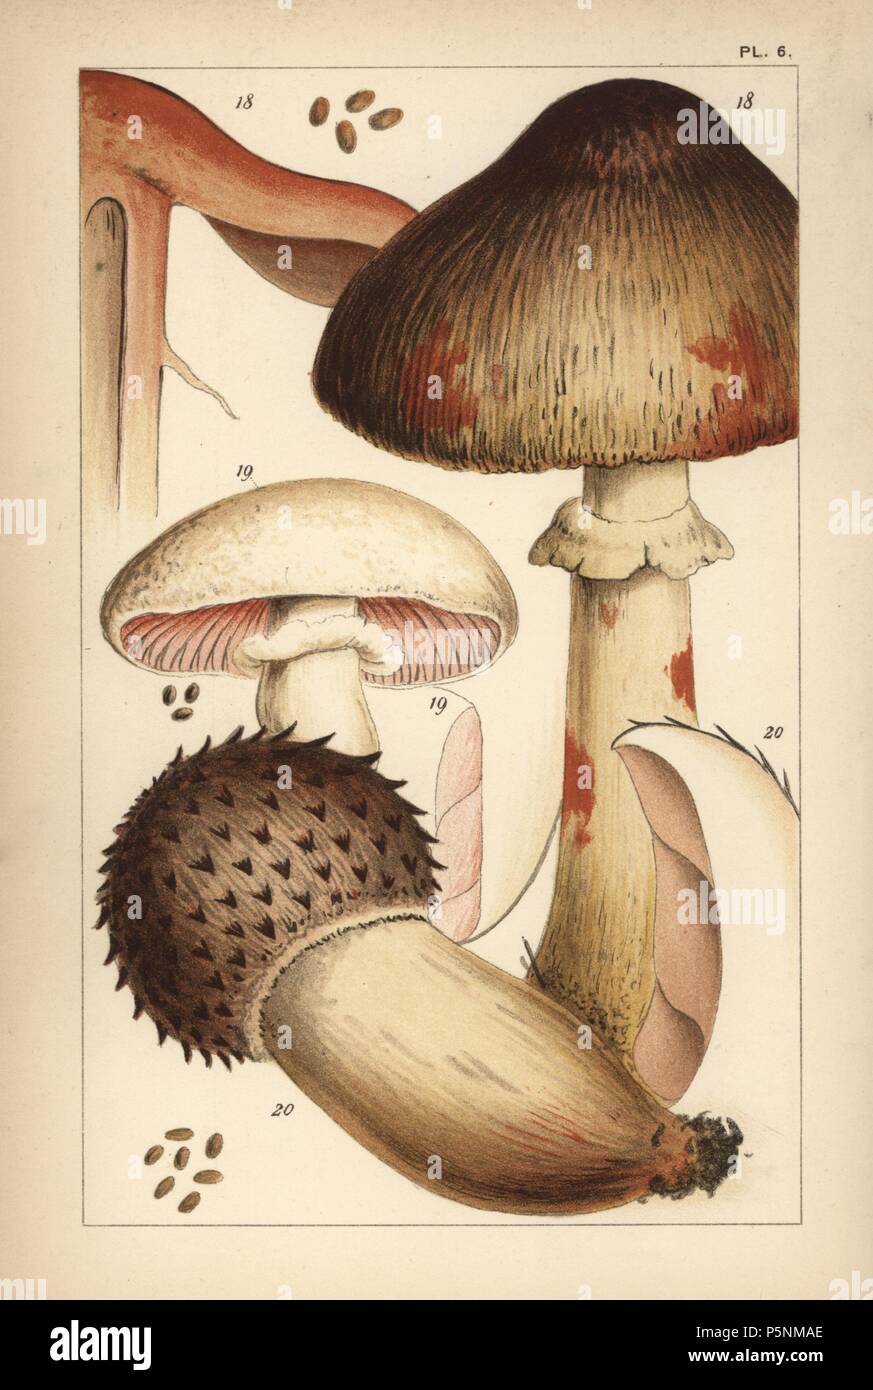 Bleeding mushroom, Agaricus haemorrhoidarius 18, field mushroom, A. campestris 19, and A. elvensis 20. Chromolithograph after an illustration by M. C. Cooke from his own 'British Edible Fungi, how to distinguish and how to cook them,' London, Kegan Paul, 1891. Mordecai Cubitt Cooke (1825-1914) was a British botanist, mycologist and artist. He was curator a the India Musuem from 1860 to 1879, when he transferred along with the botanical collection to the Royal Botanic Gardens, Kew. Stock Photo